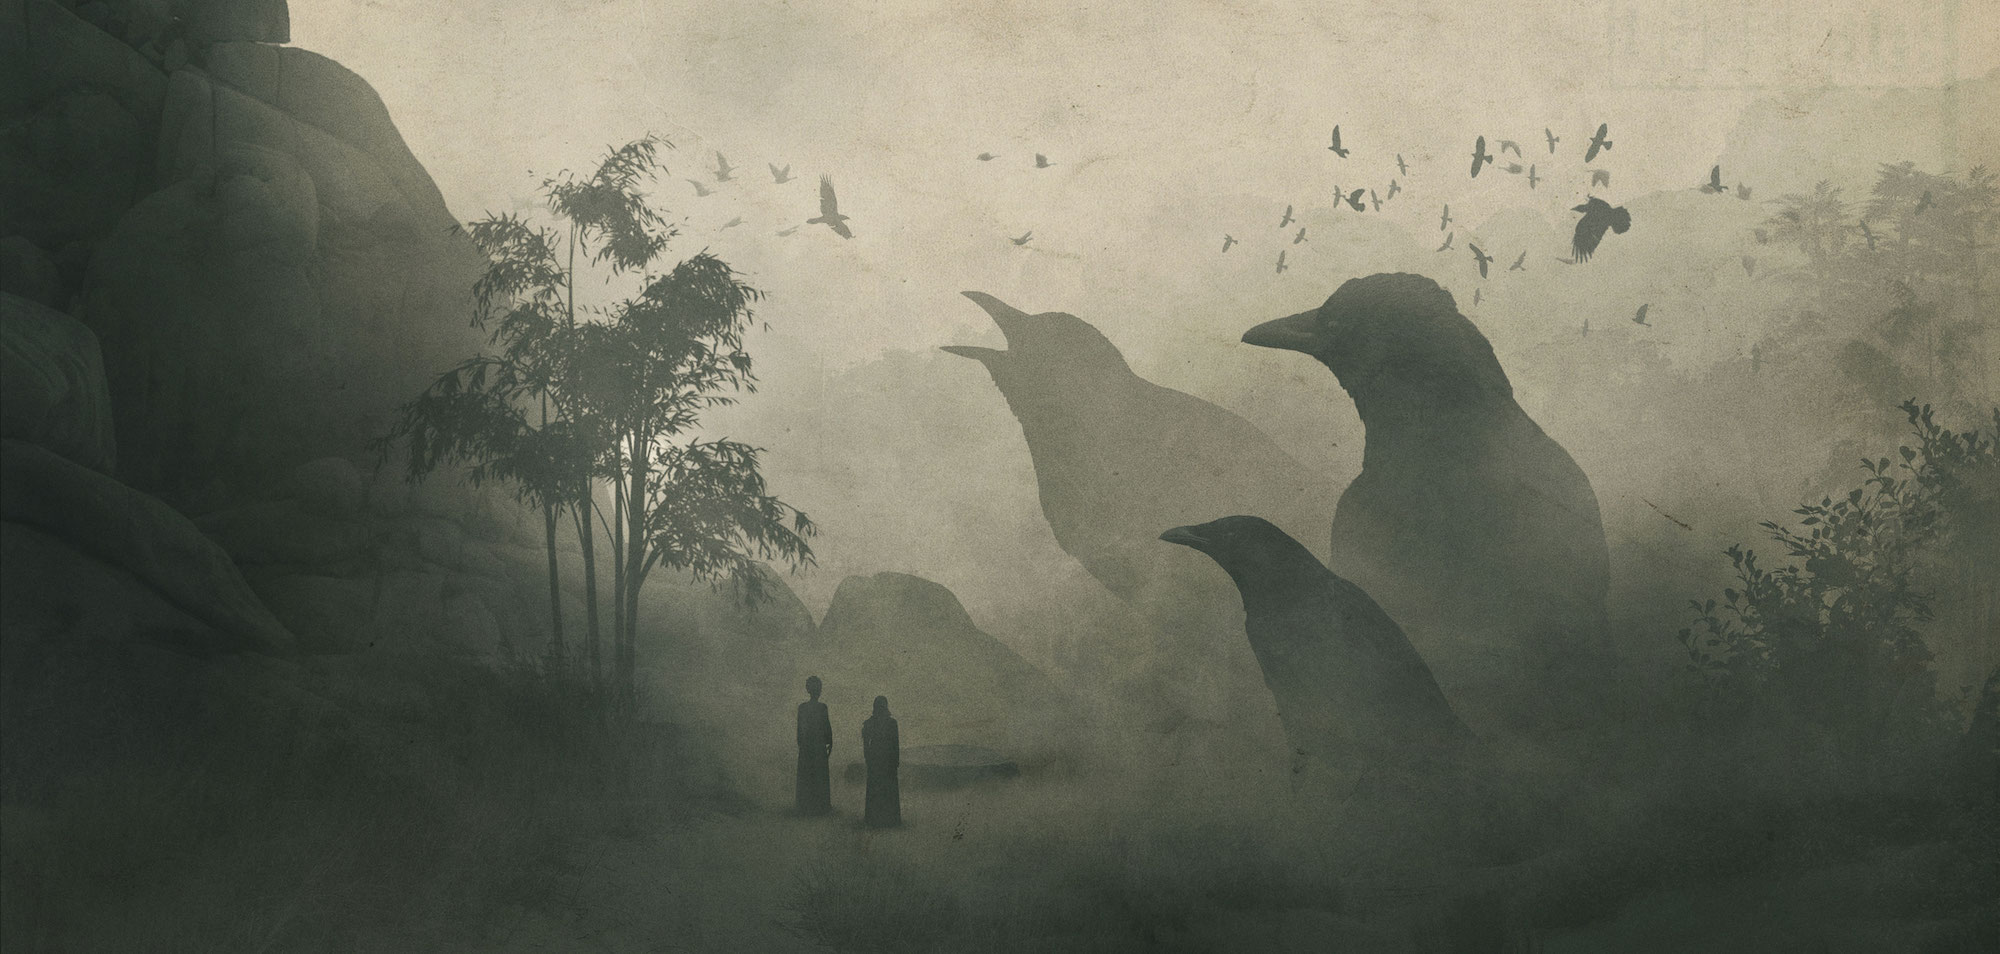 Two figures wait in the dark mist. Around them, crows. Lots of crows.